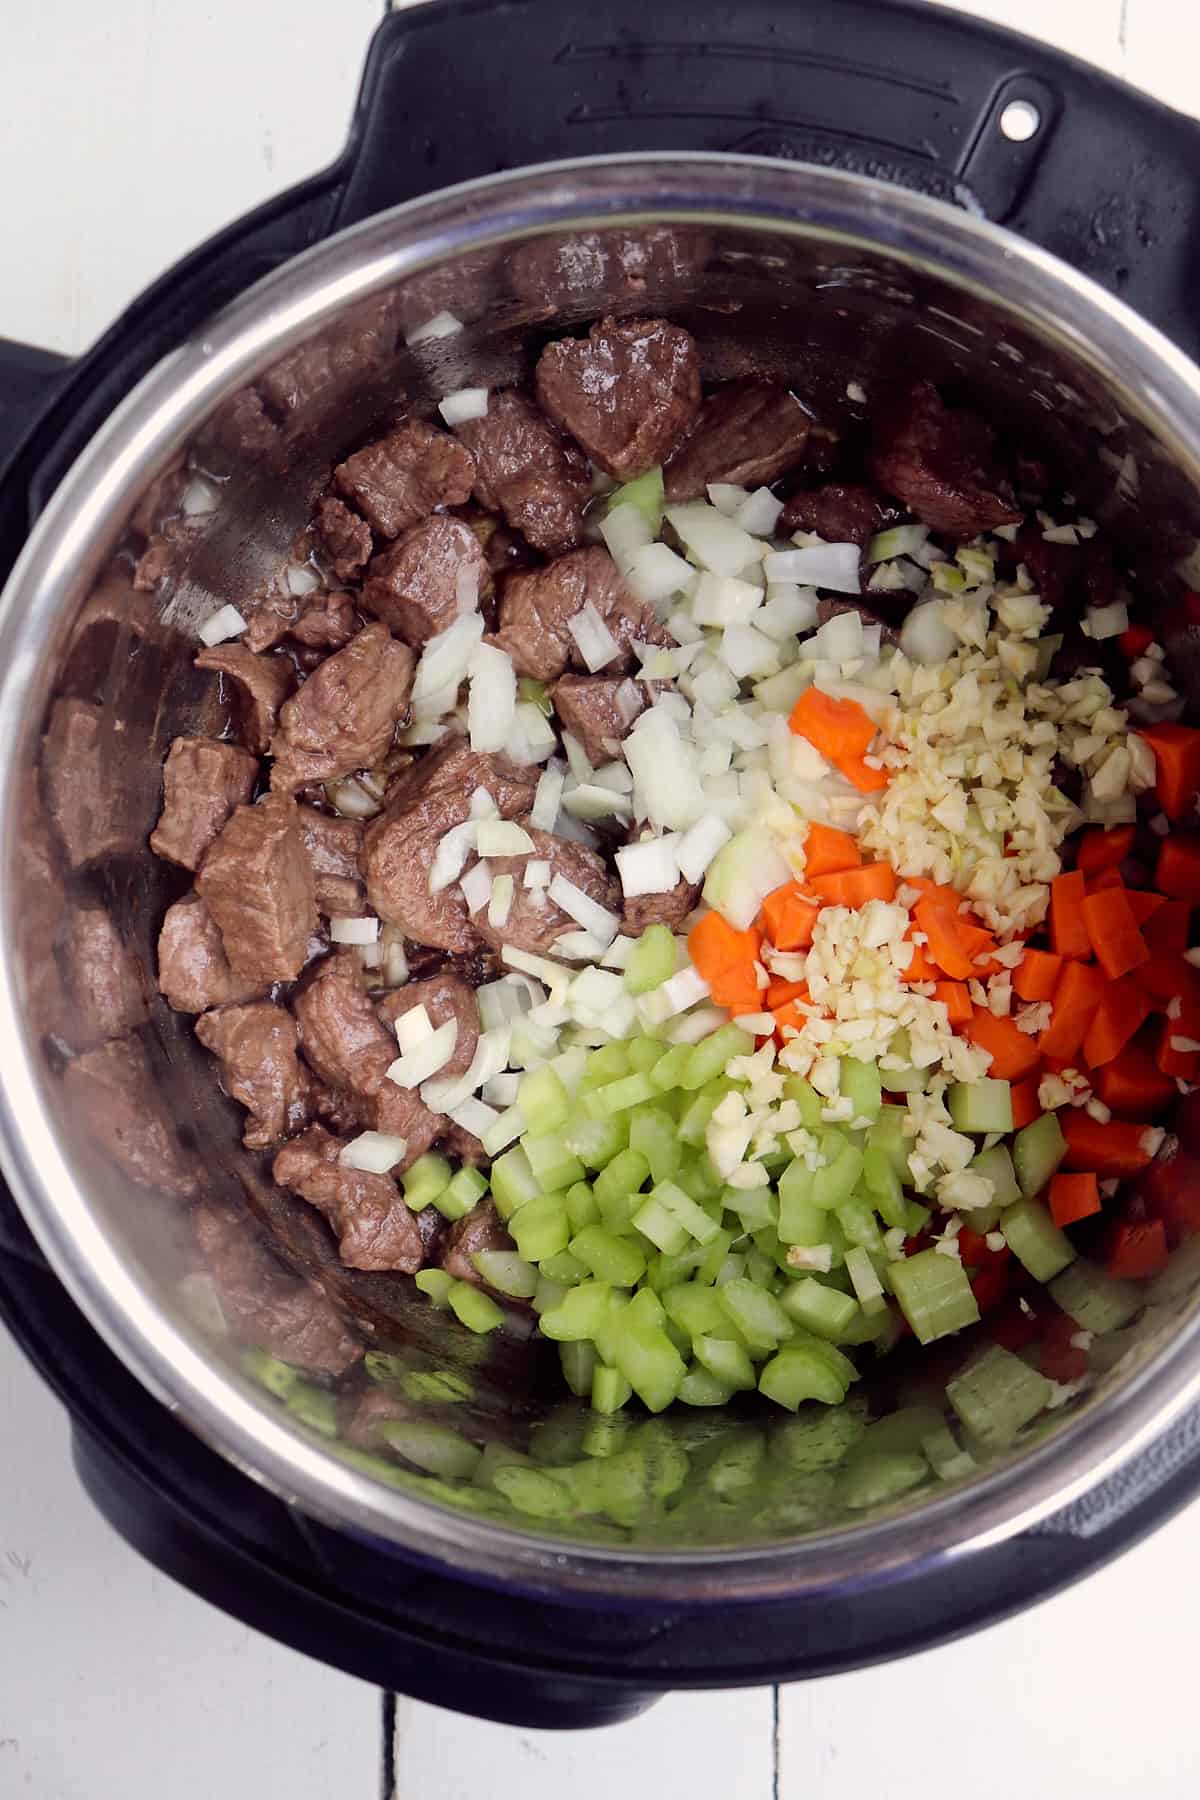 mirepoix added to stew meat.